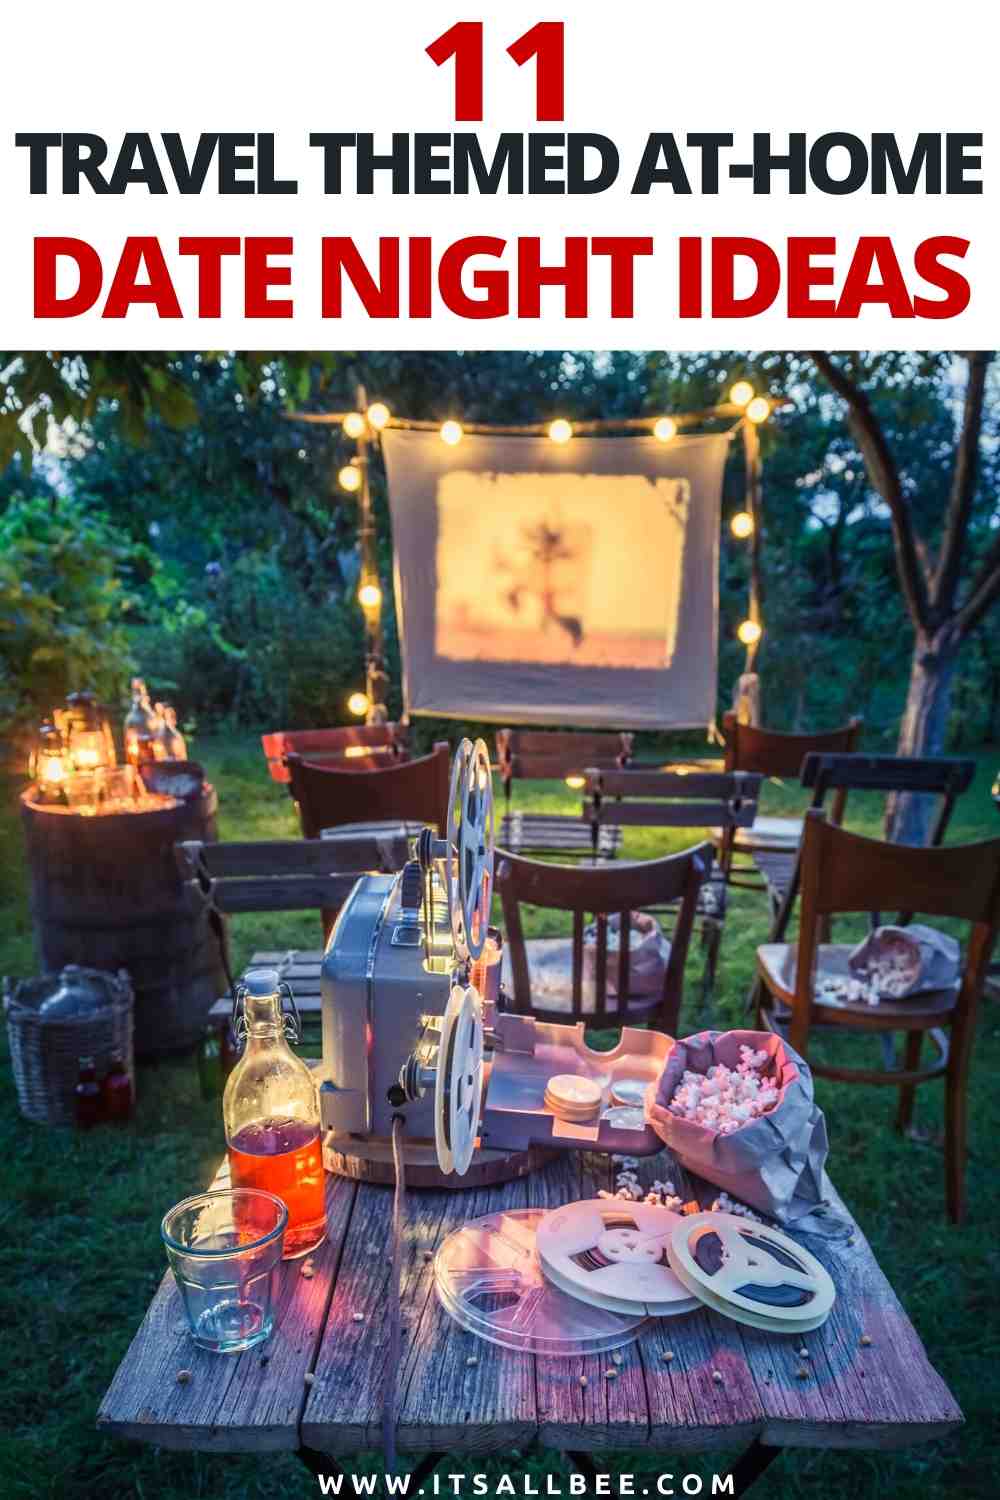 Stay At Home Date Night Ideas